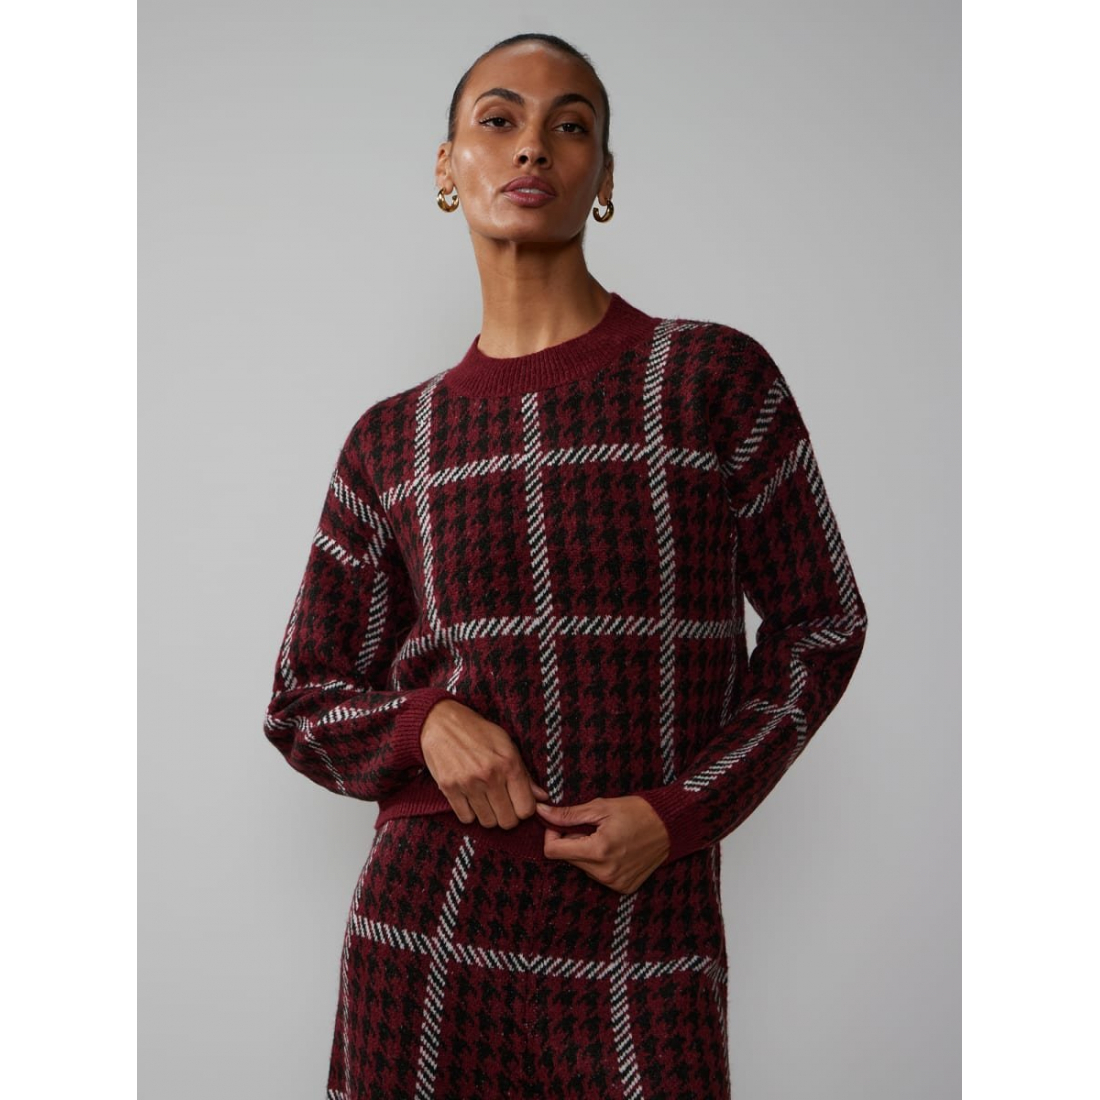 Women's 'Houndstooth Plaid' Sweater